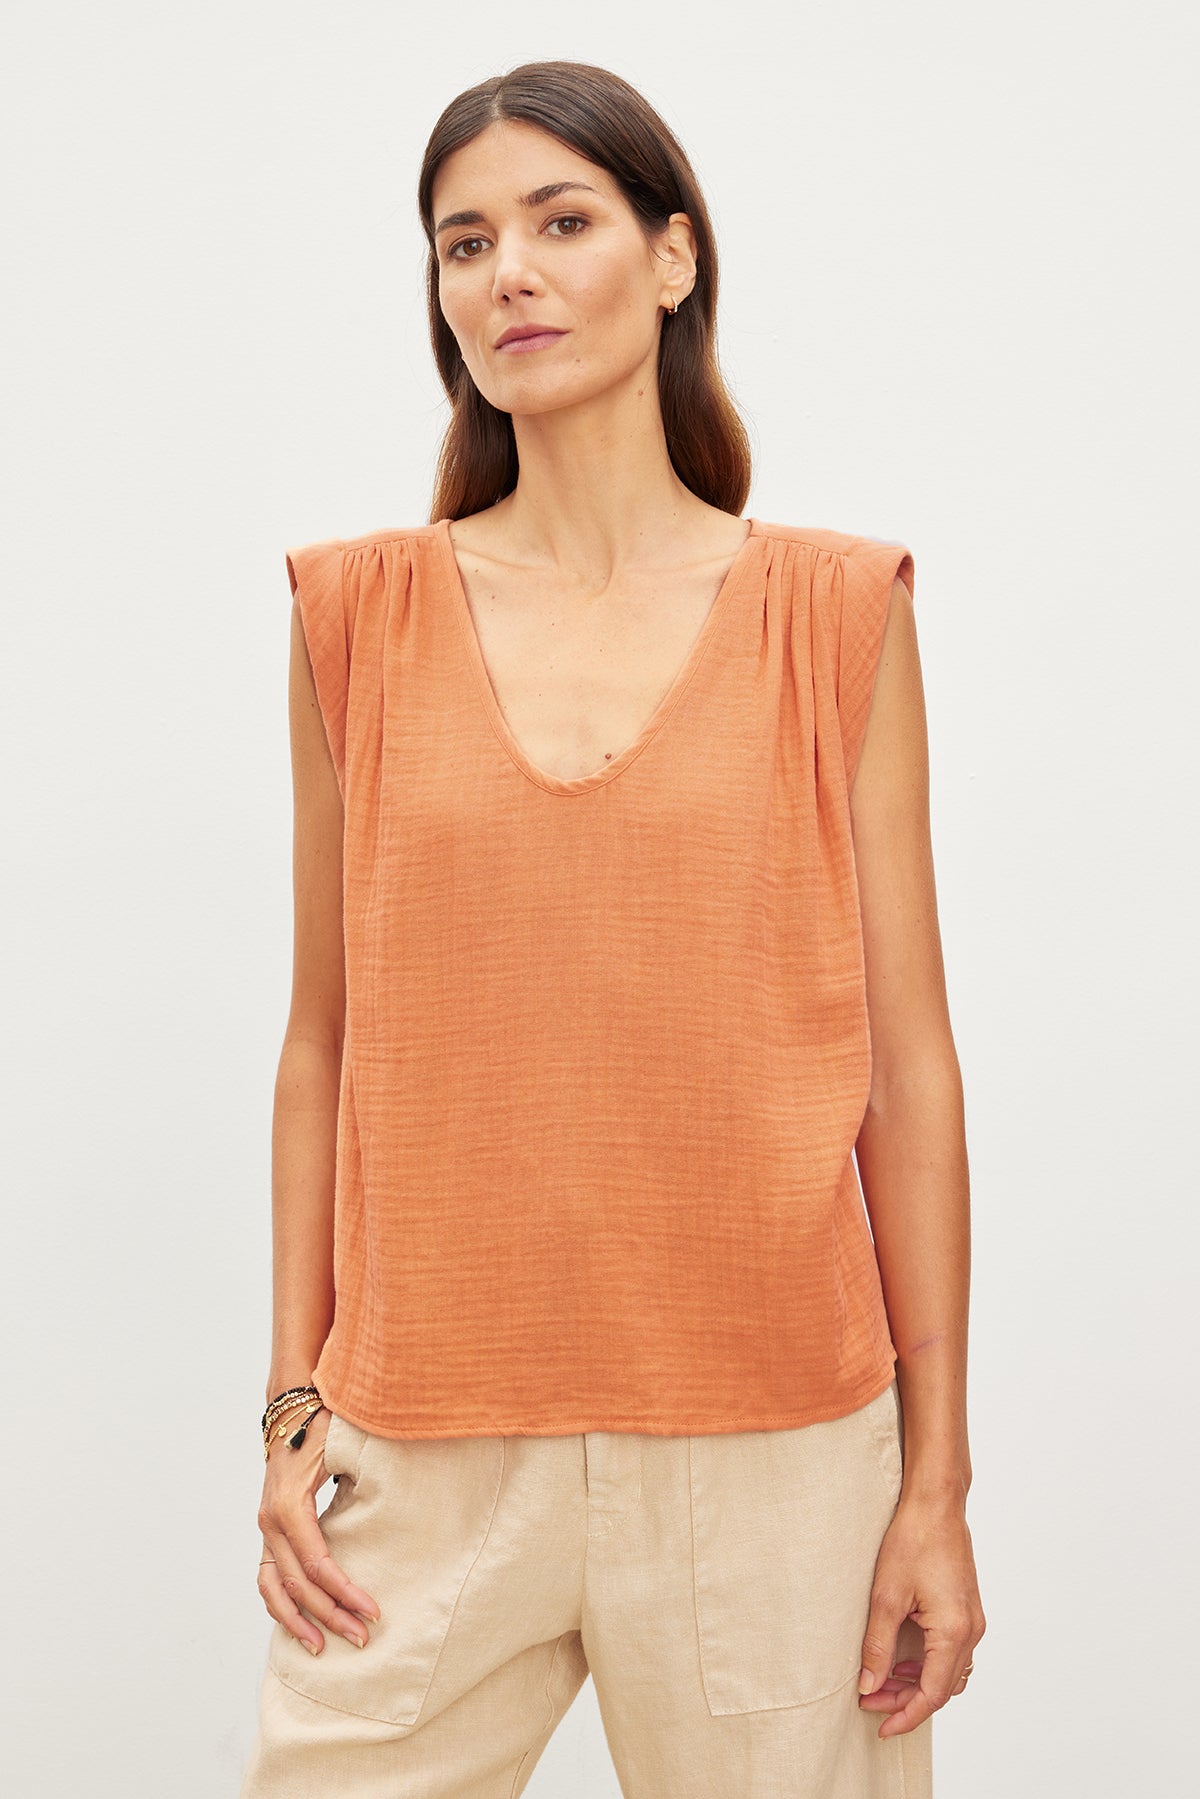 A woman wearing a JAYLA COTTON GAUZE TANK TOP in an orange color by Velvet by Graham & Spencer.-35967557533889